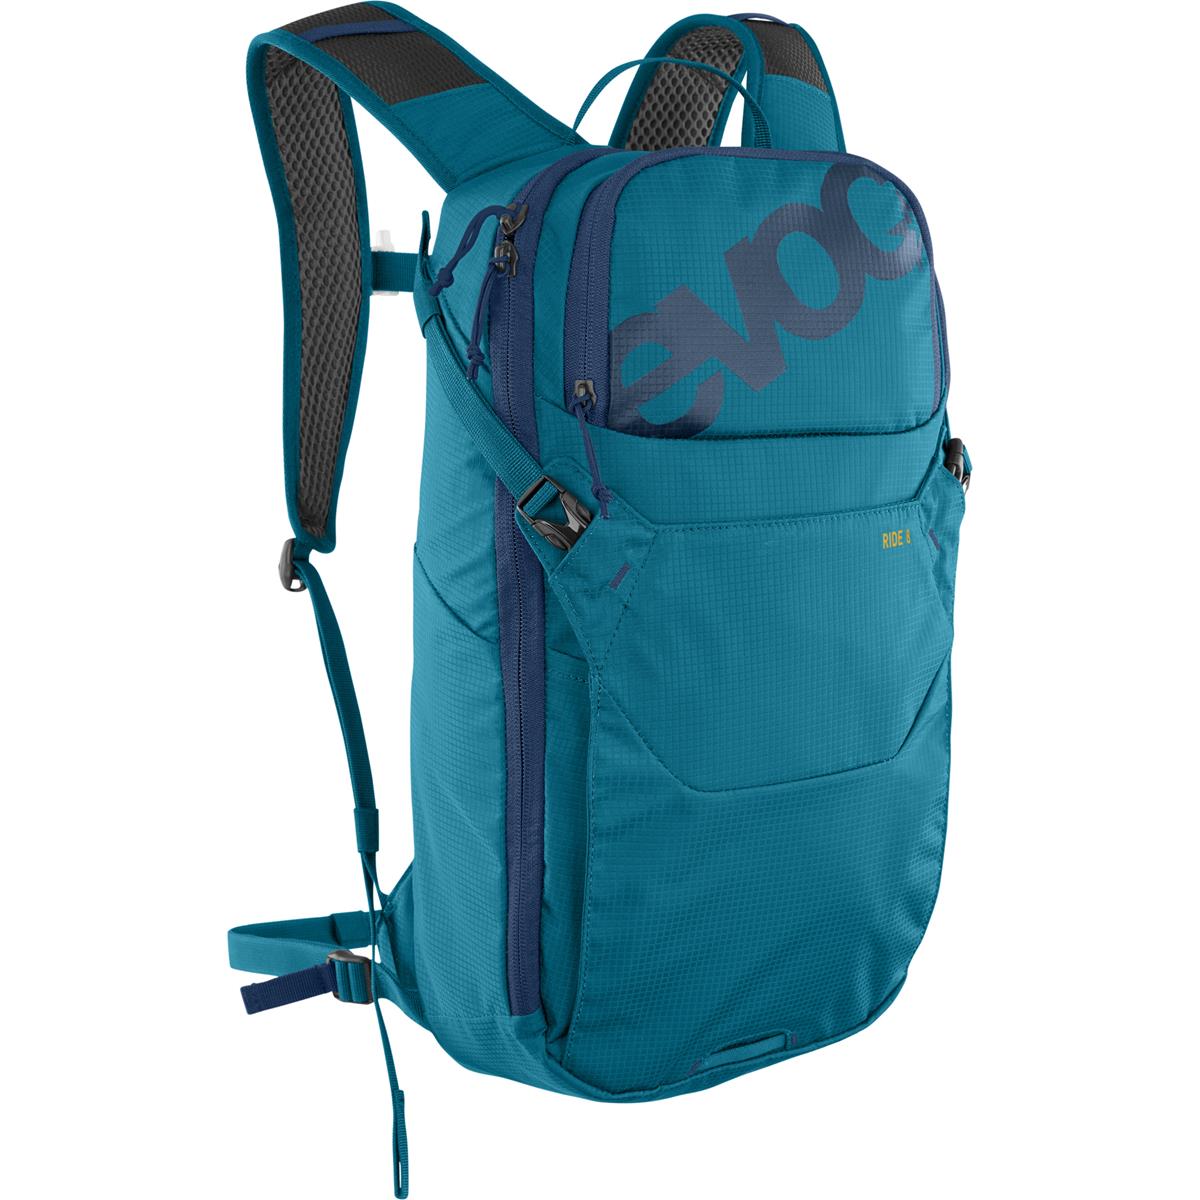 Evoc Backpack with Hydration System Compartment Ride 8 + Ocean